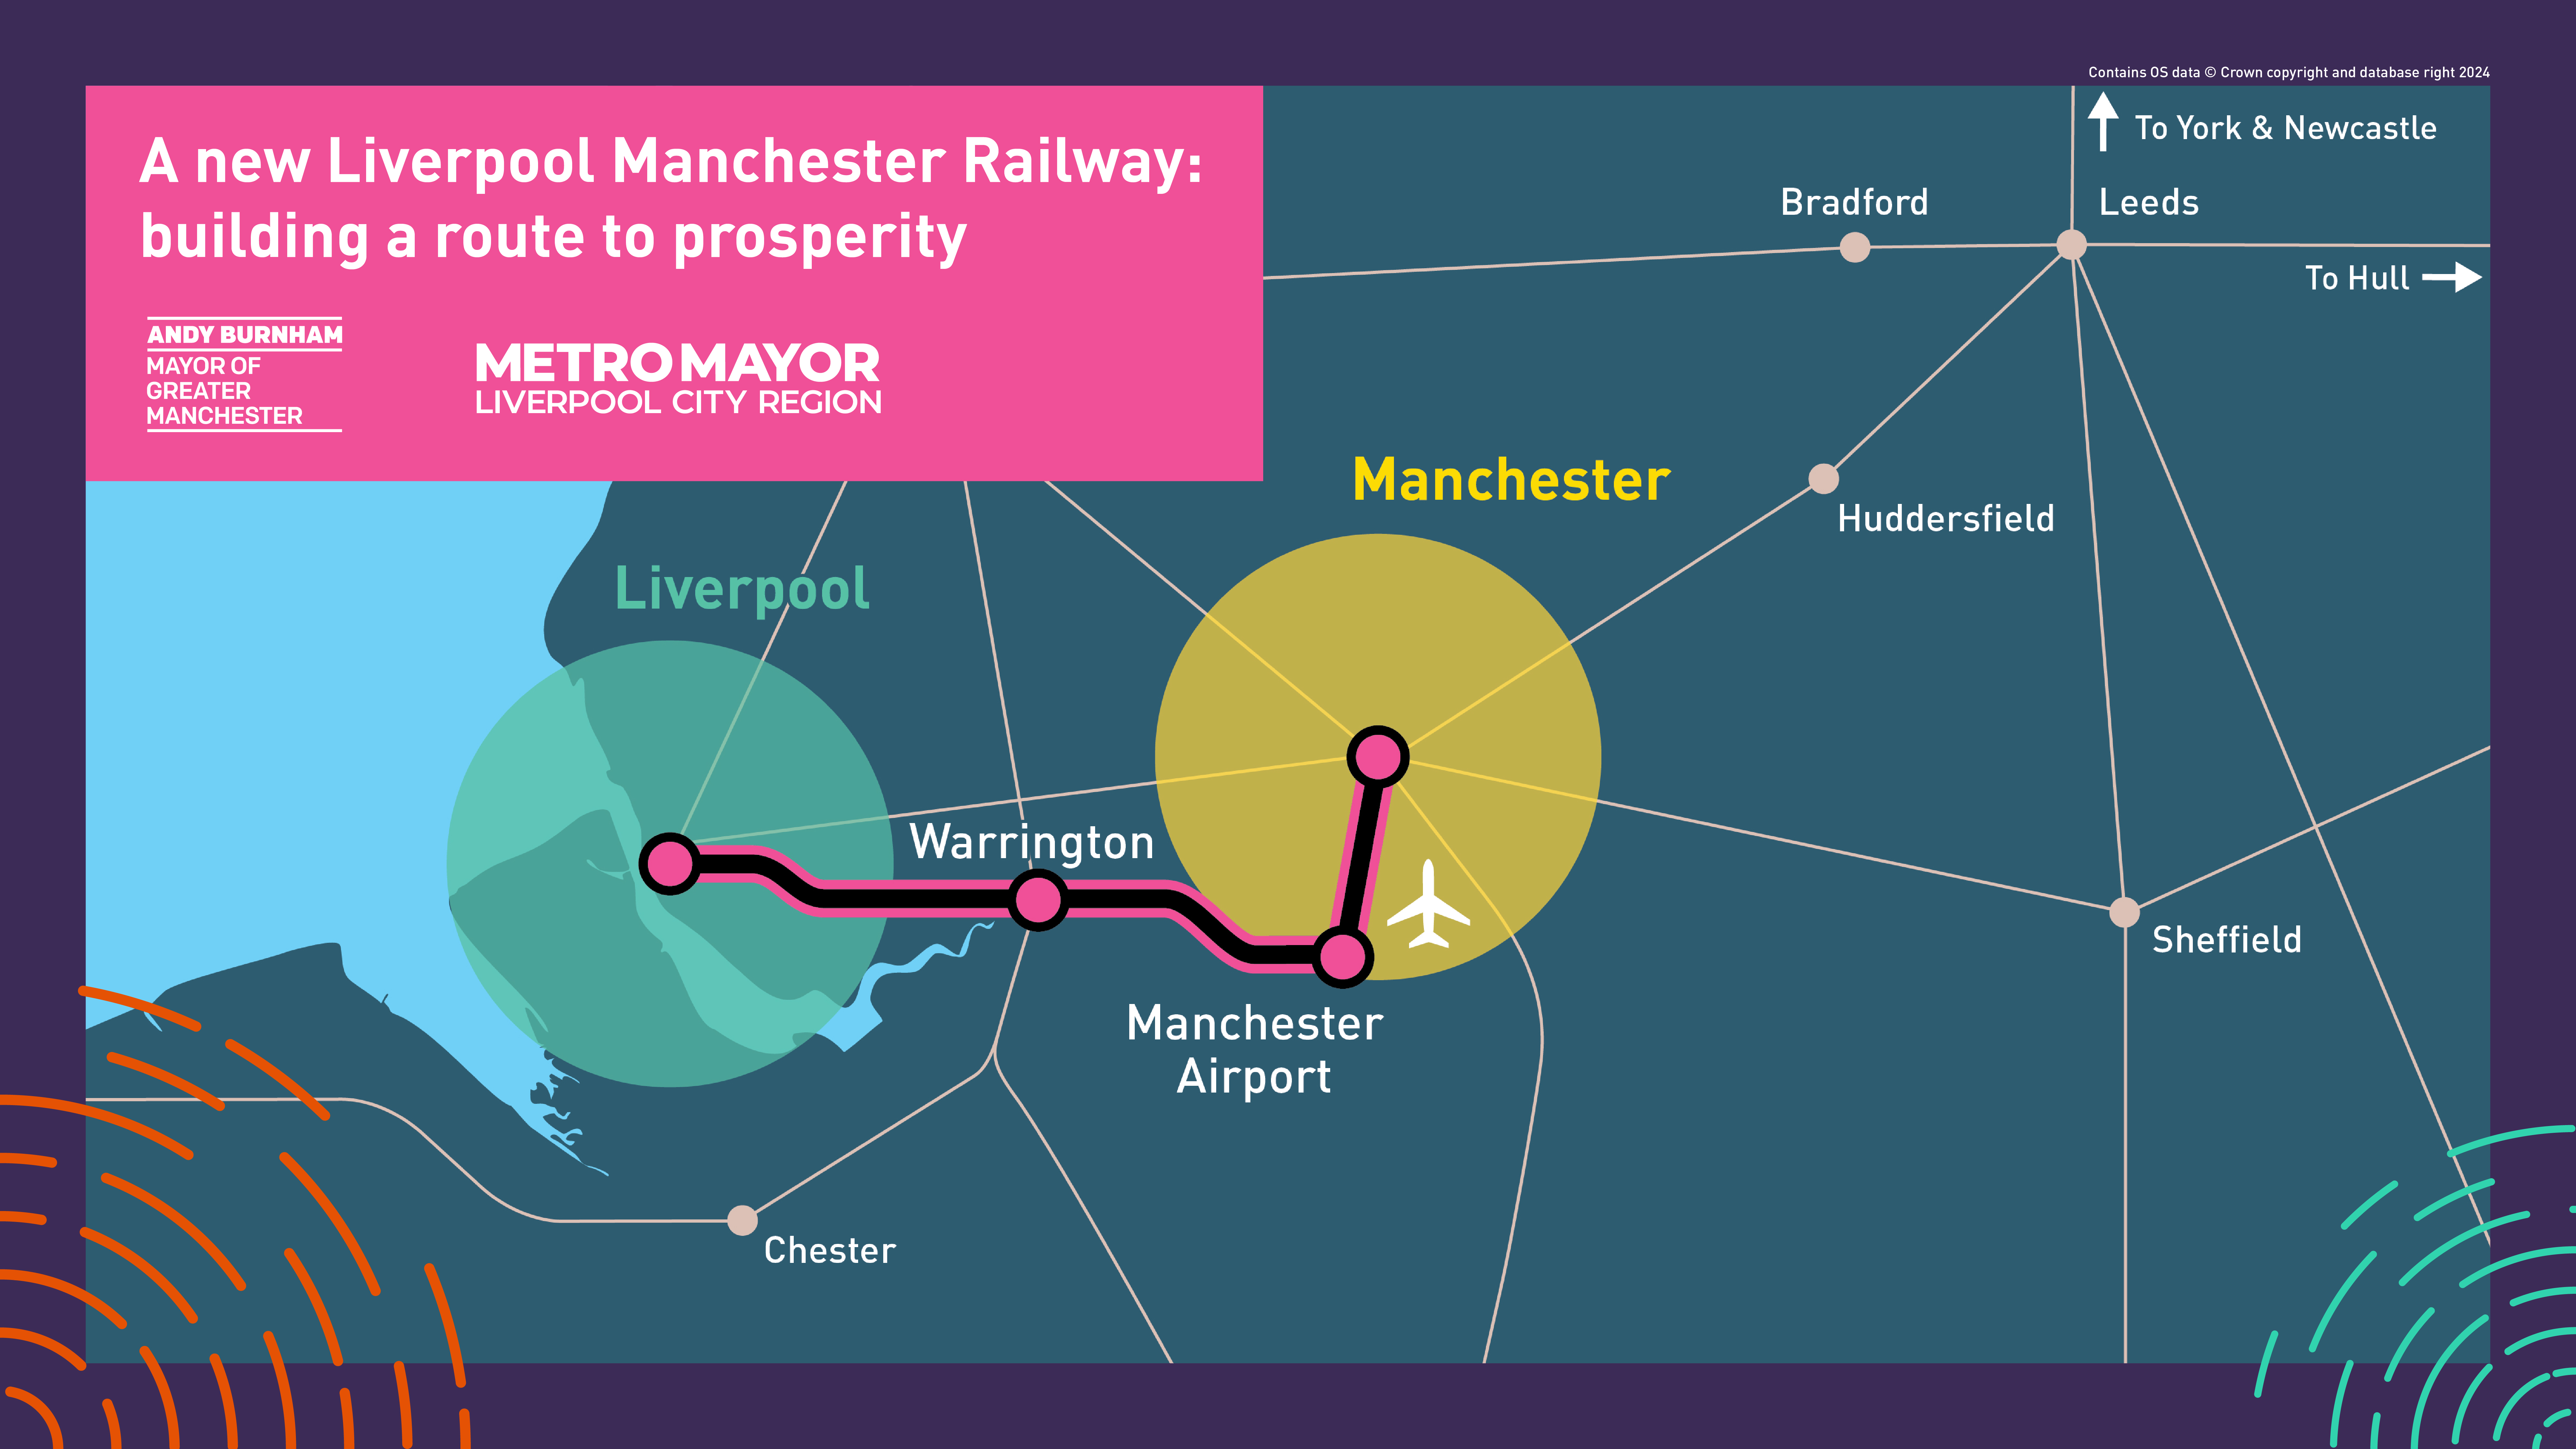 Graphic showing the proposed route of a new Liverpool Manchester Railway